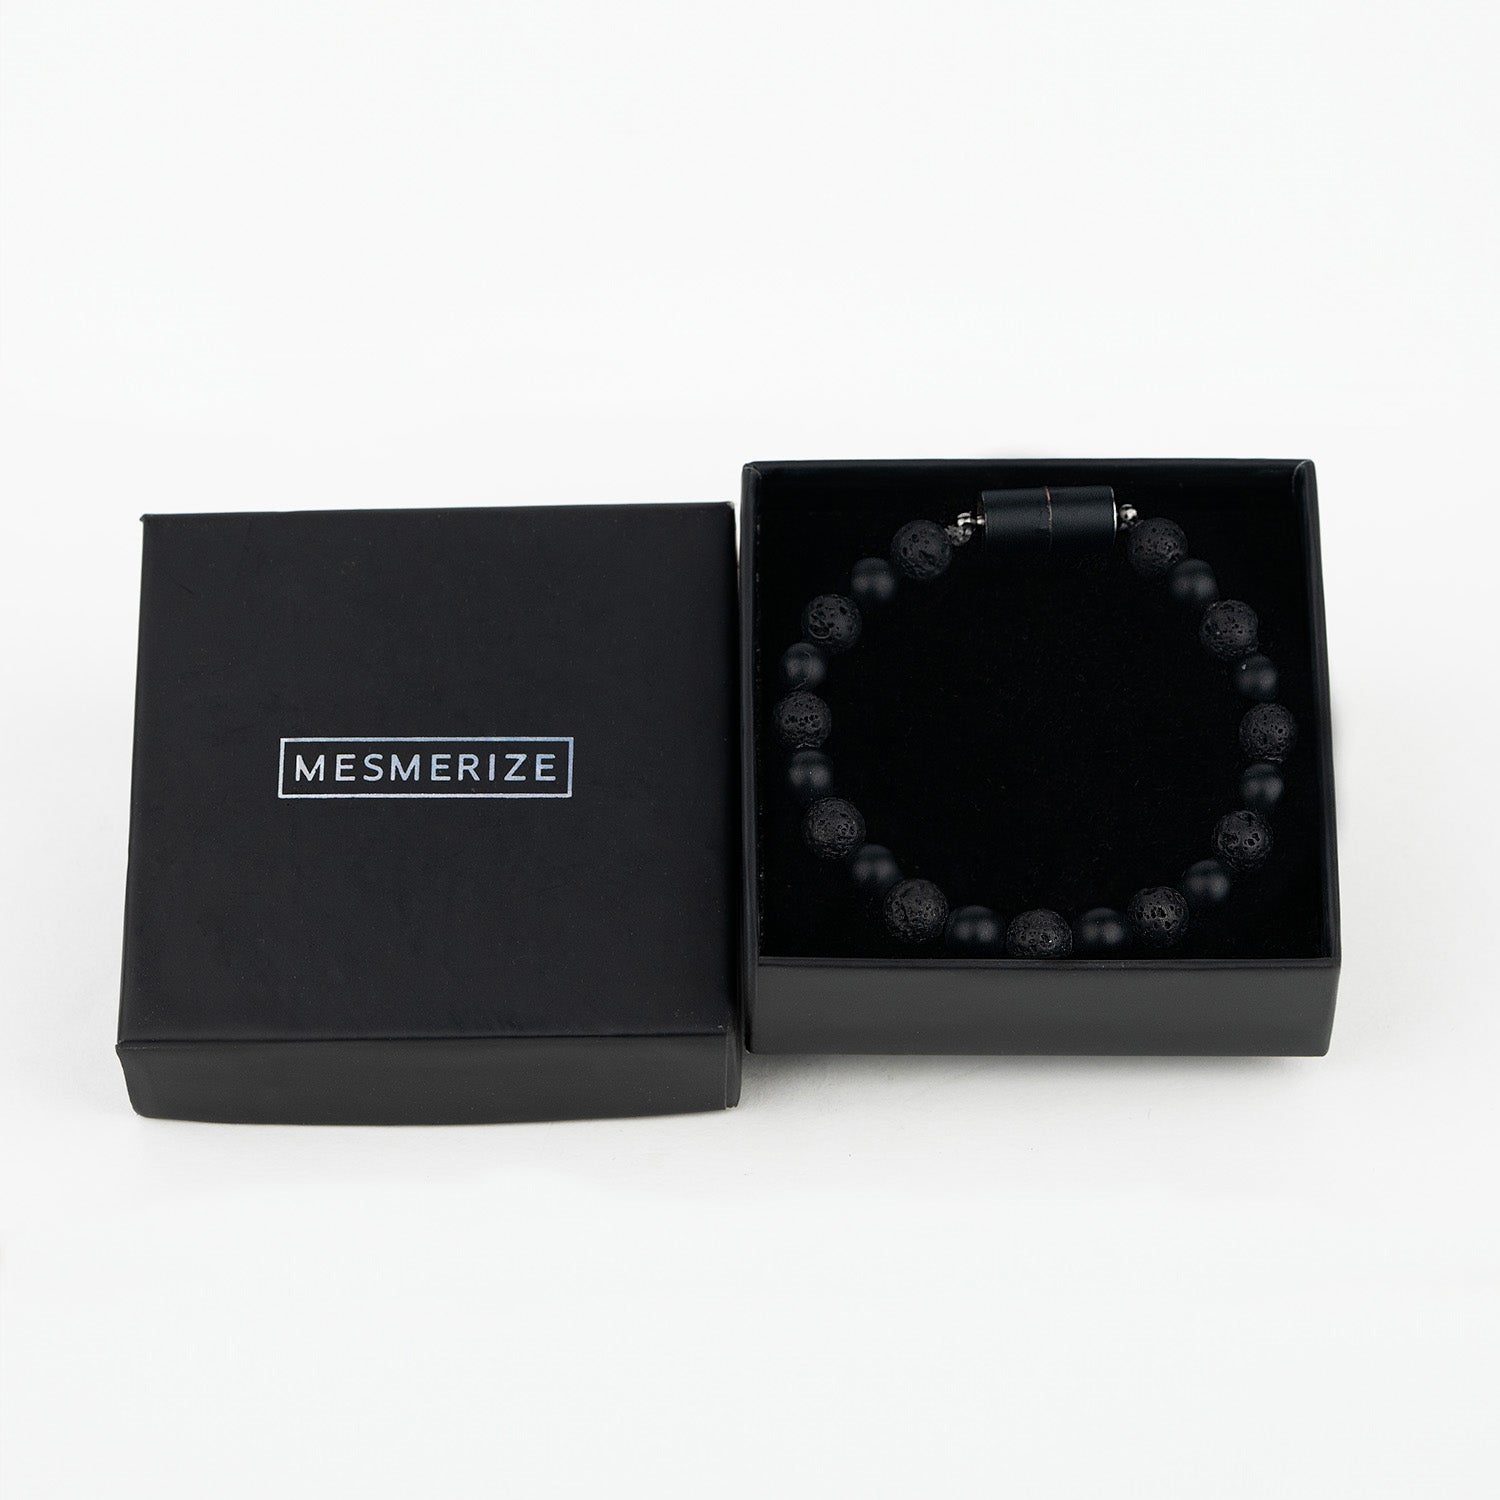 Natural Stone Jewellery Stealth Matte Black Onyx and Lava Natural Stone Bracelet with Magsnap